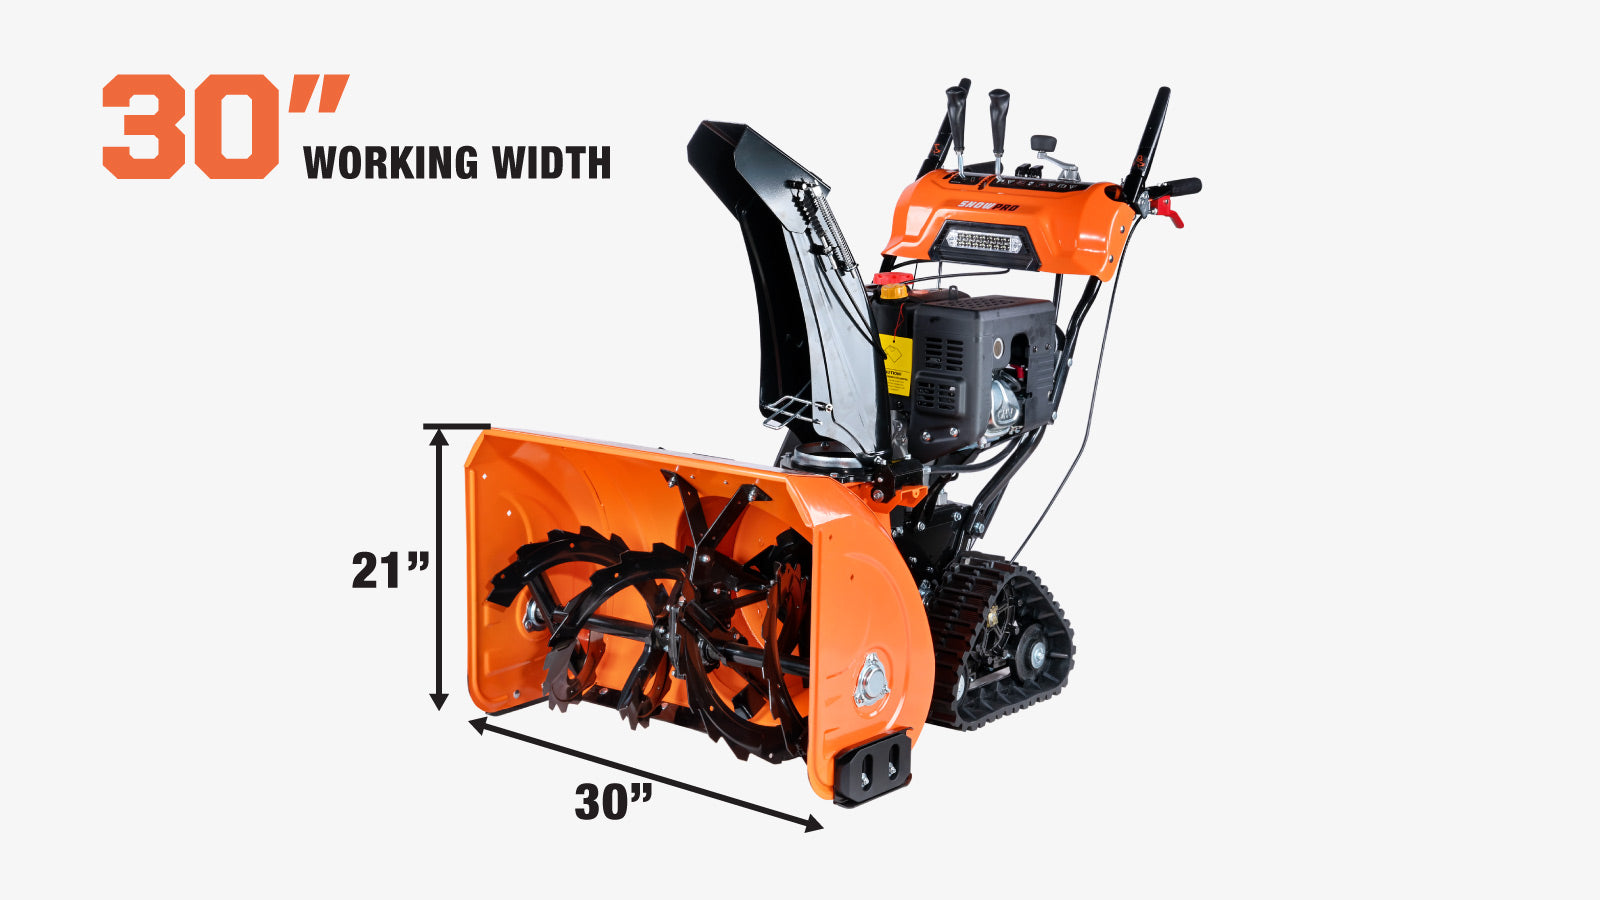 TMG Industrial 30” Self-Propelled Gas-Powered Snow Blower, Dual-Stage, Rubber Track, Heated Hand Grips, Electric Start, 21” Intake Height, LED Light, TMG-GSB30-specifications-image